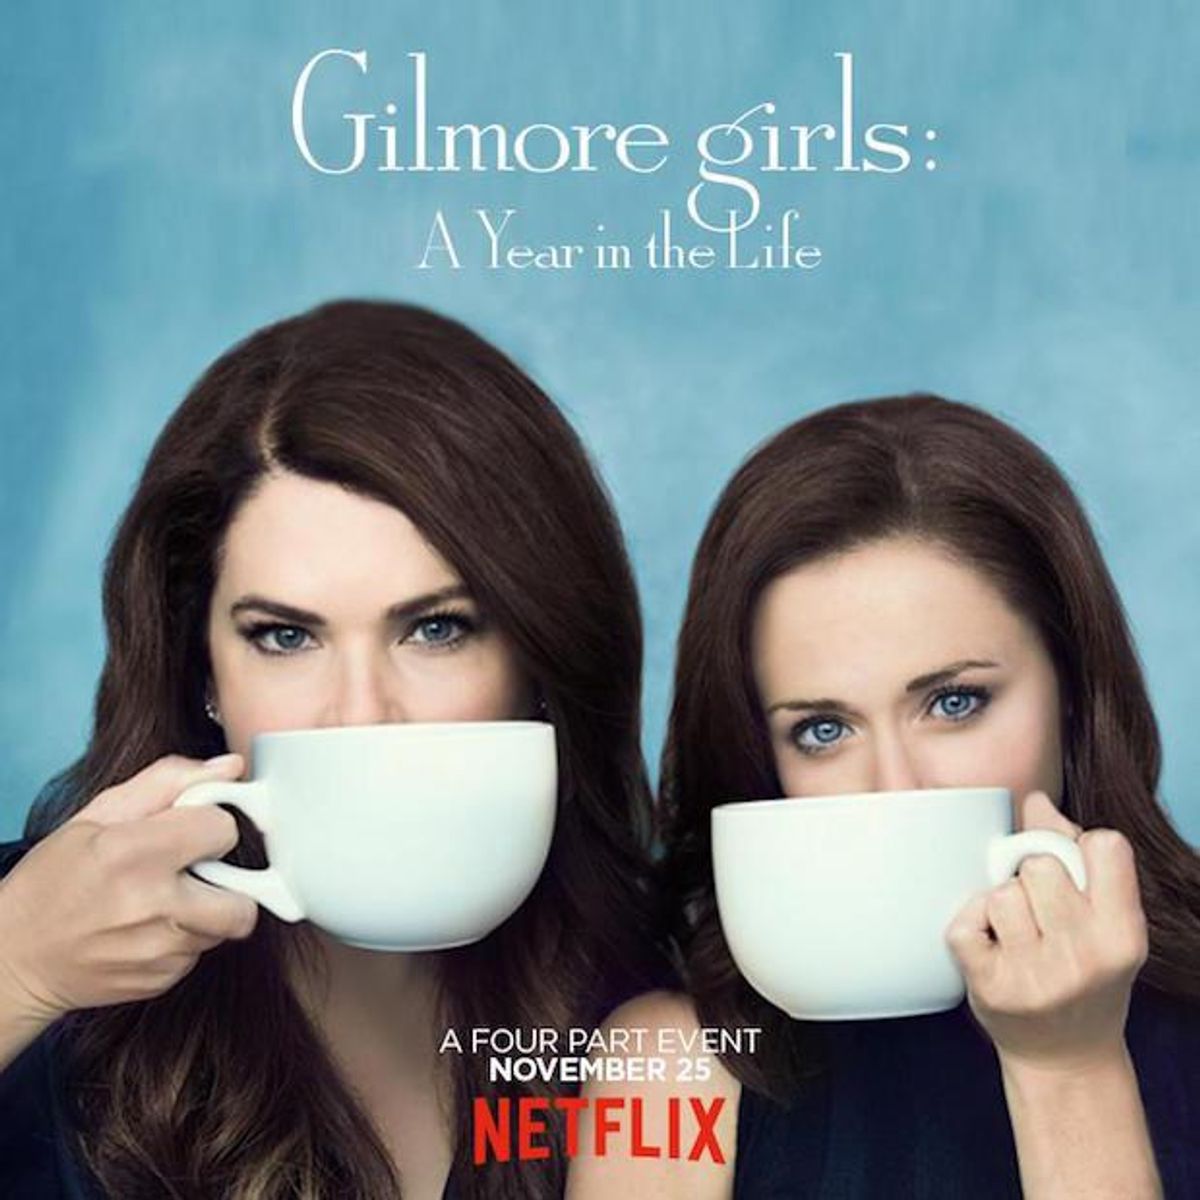 A Ranking of the "Gilmore Girls: A Year in the Life" Characters